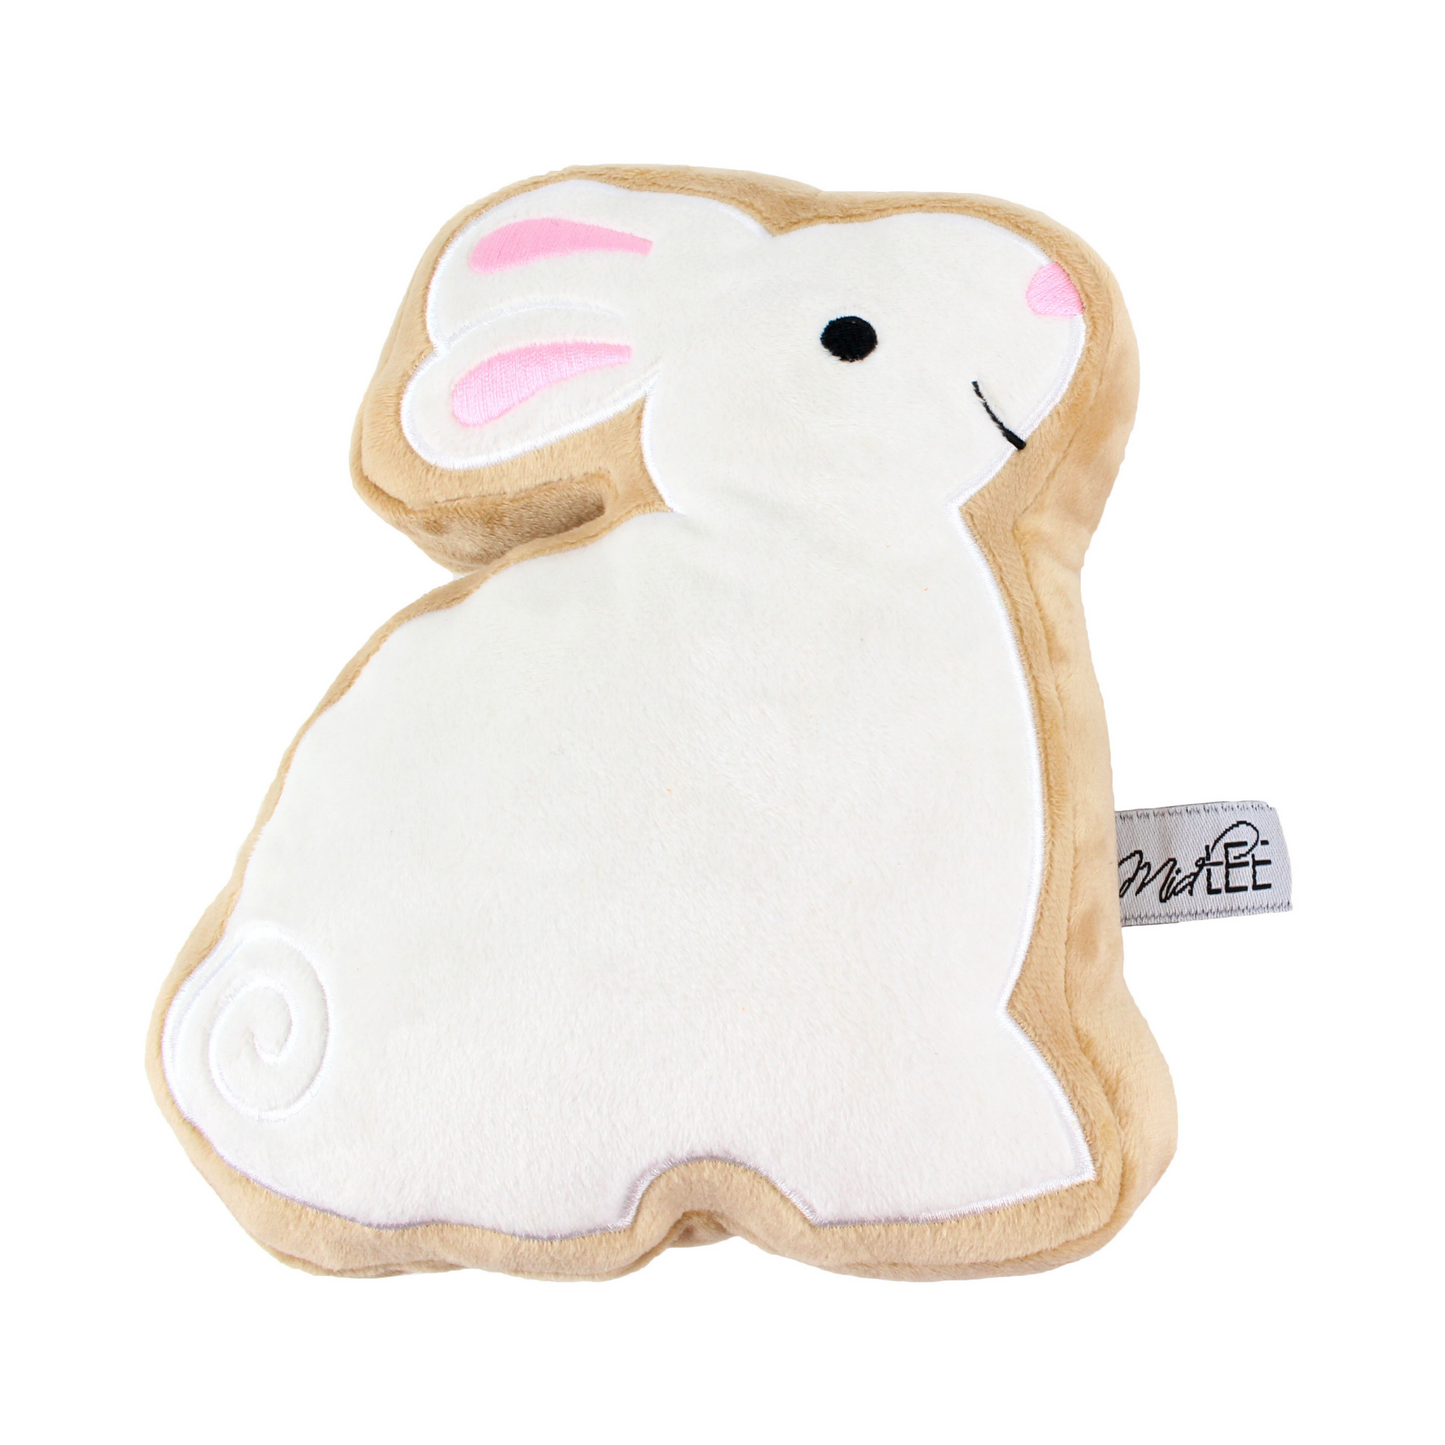 Midlee Sugar Cookie Easter Bunny Dog Toy